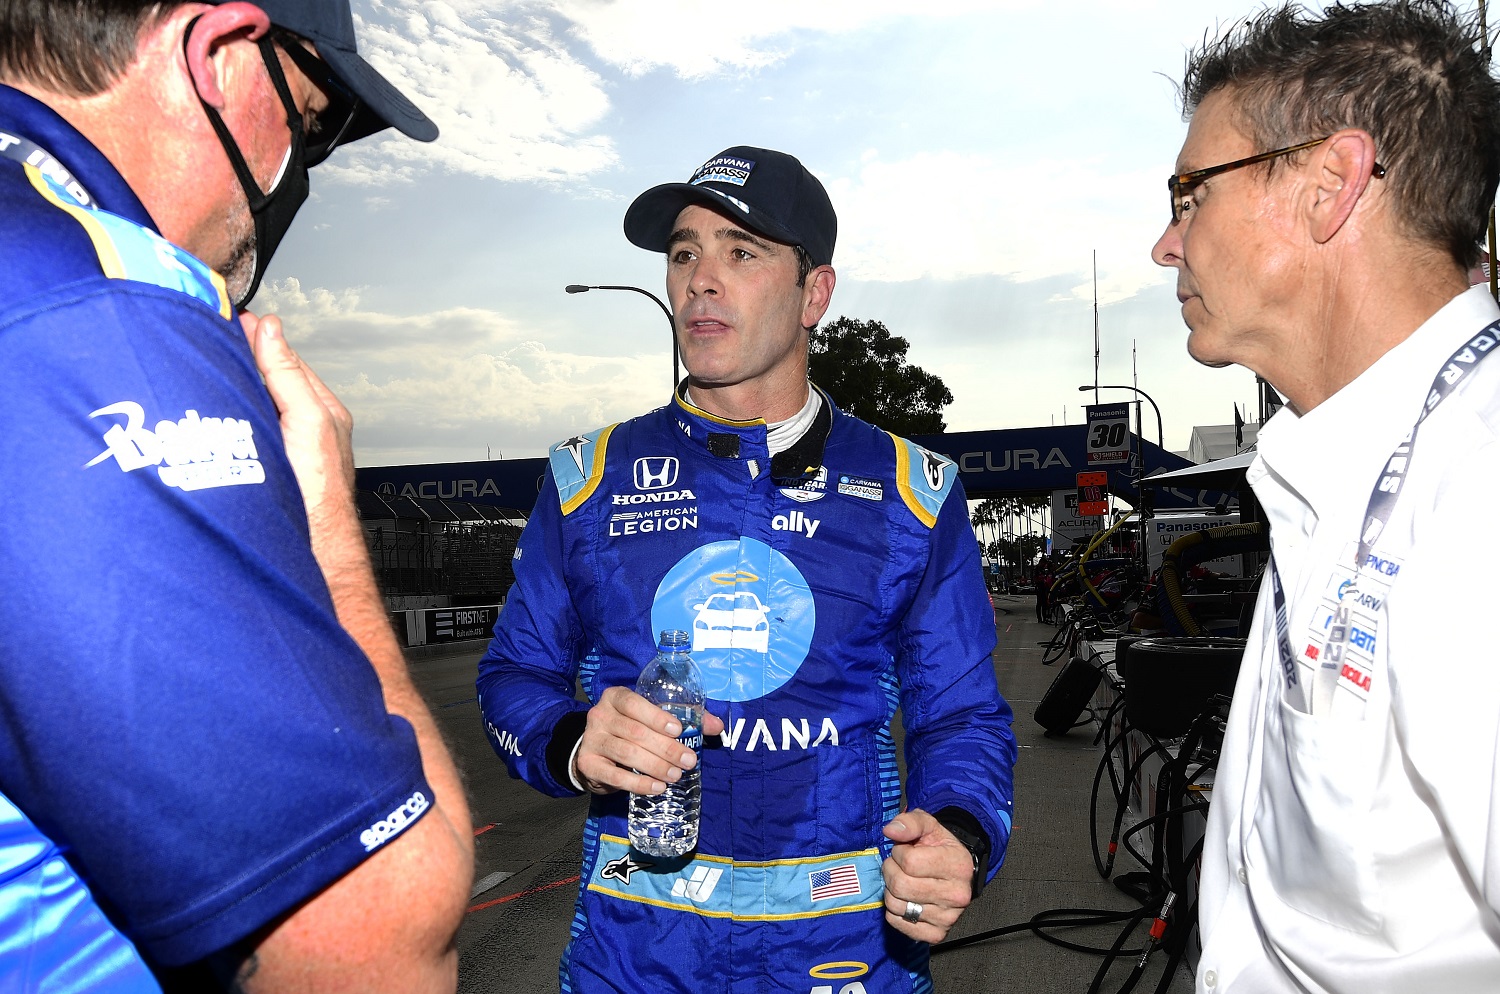 Indycar driver Jimmie Johnson, center, speaks with Scott Pruett, right, and a crew member following the opening practice session at the Grand Prix of Long Beach on Sept. 24, 2021.